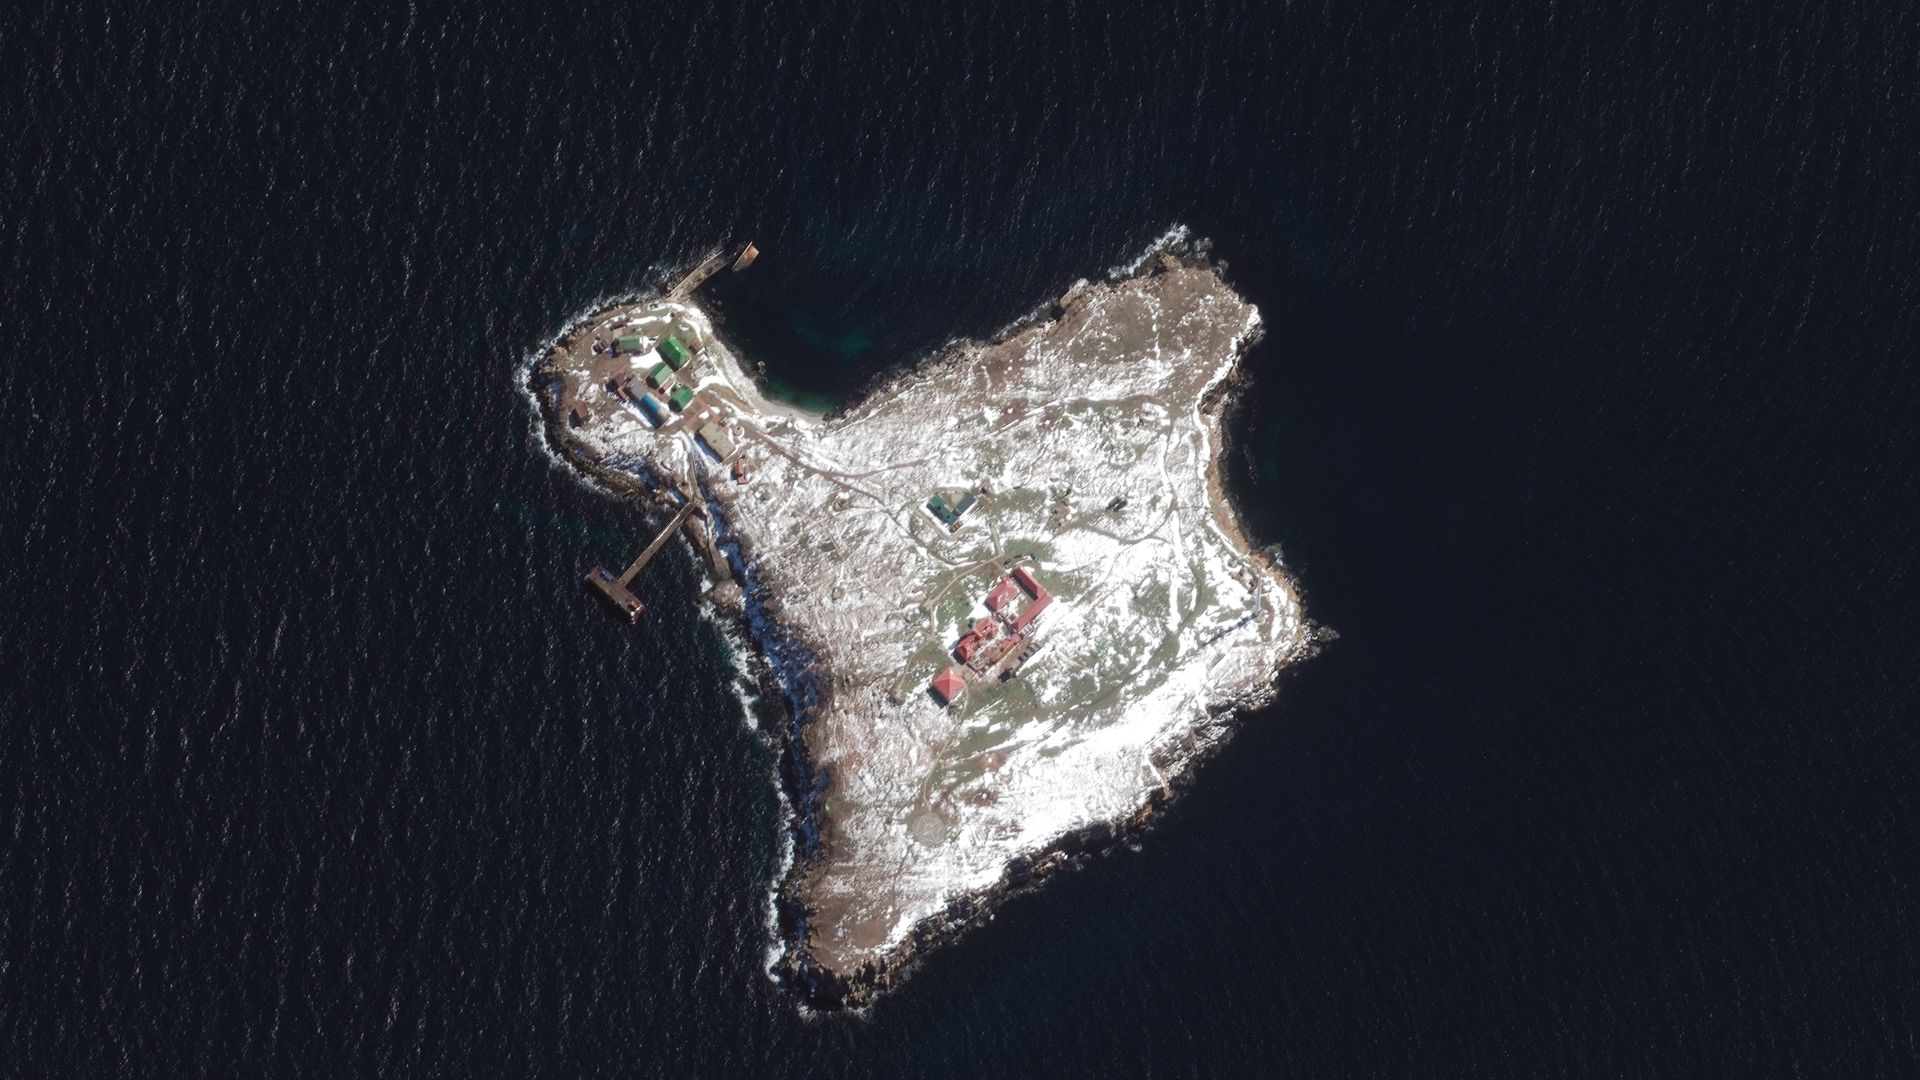 A satellite image of Snake Island in the Black Sea captured by Maxar Technologies after Russia's invasion on March 13.